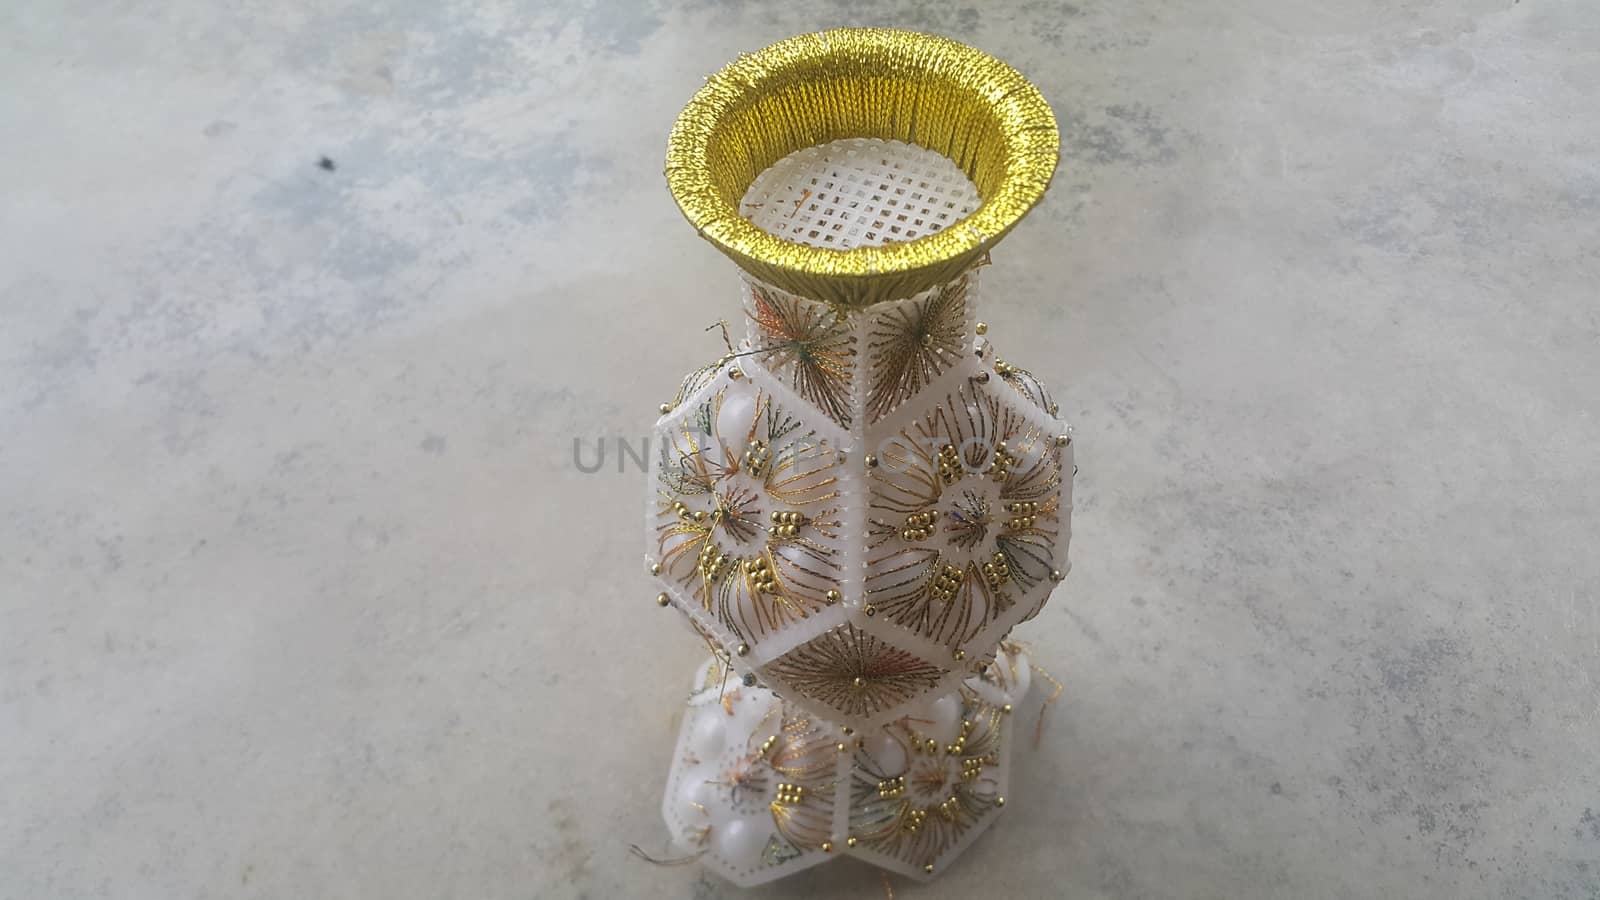 A beautiful ceramic vase placed on a grey floor used for flowers or bouquet by Photochowk